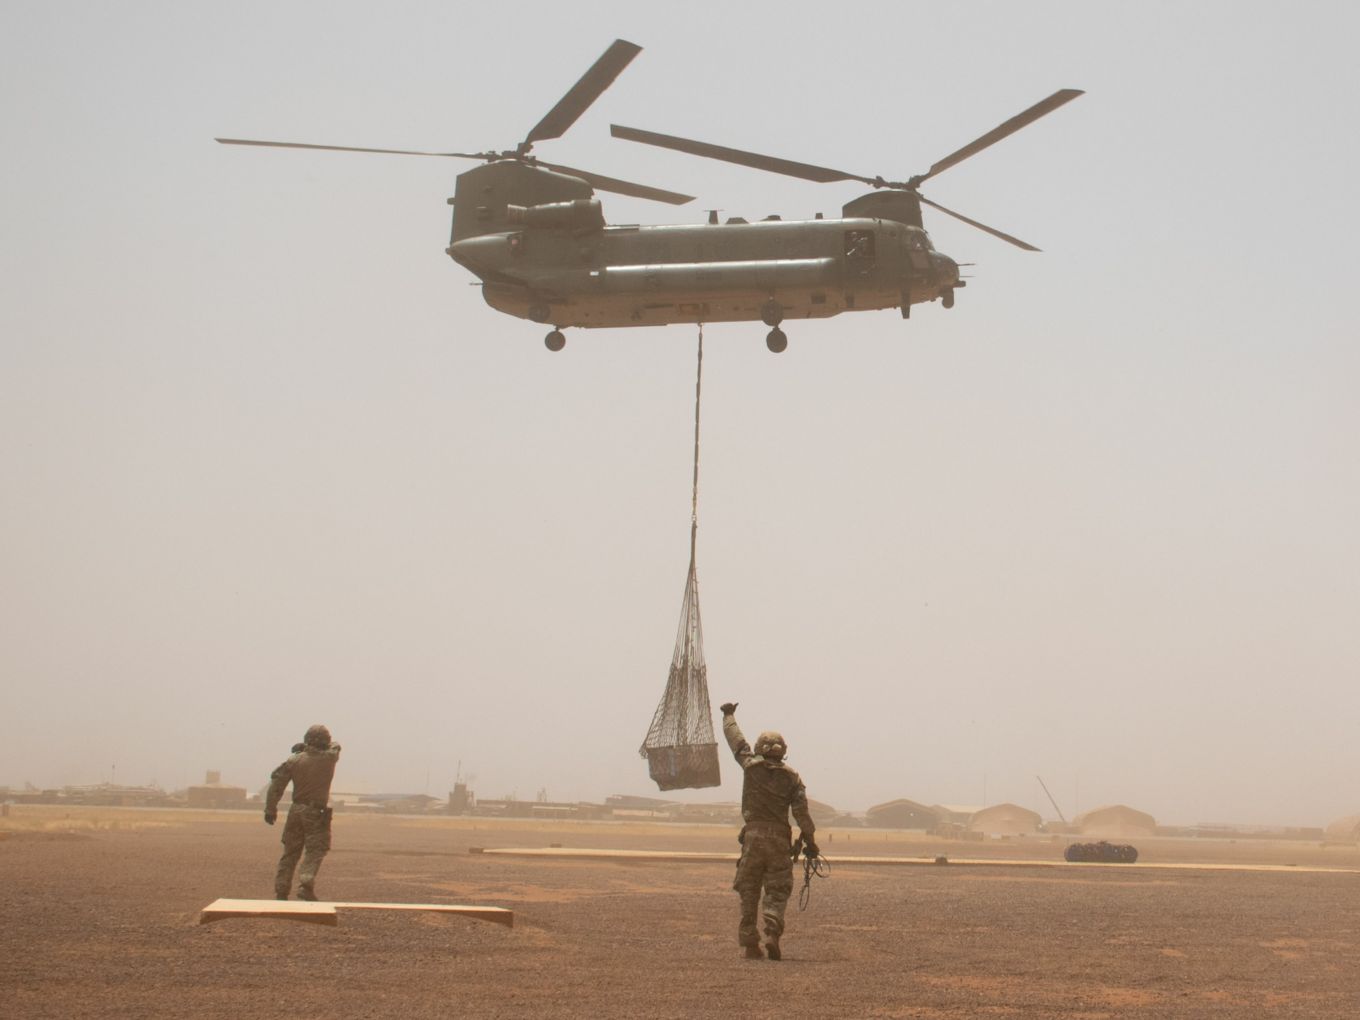 Chinook carries underslung load above personnel on ground.